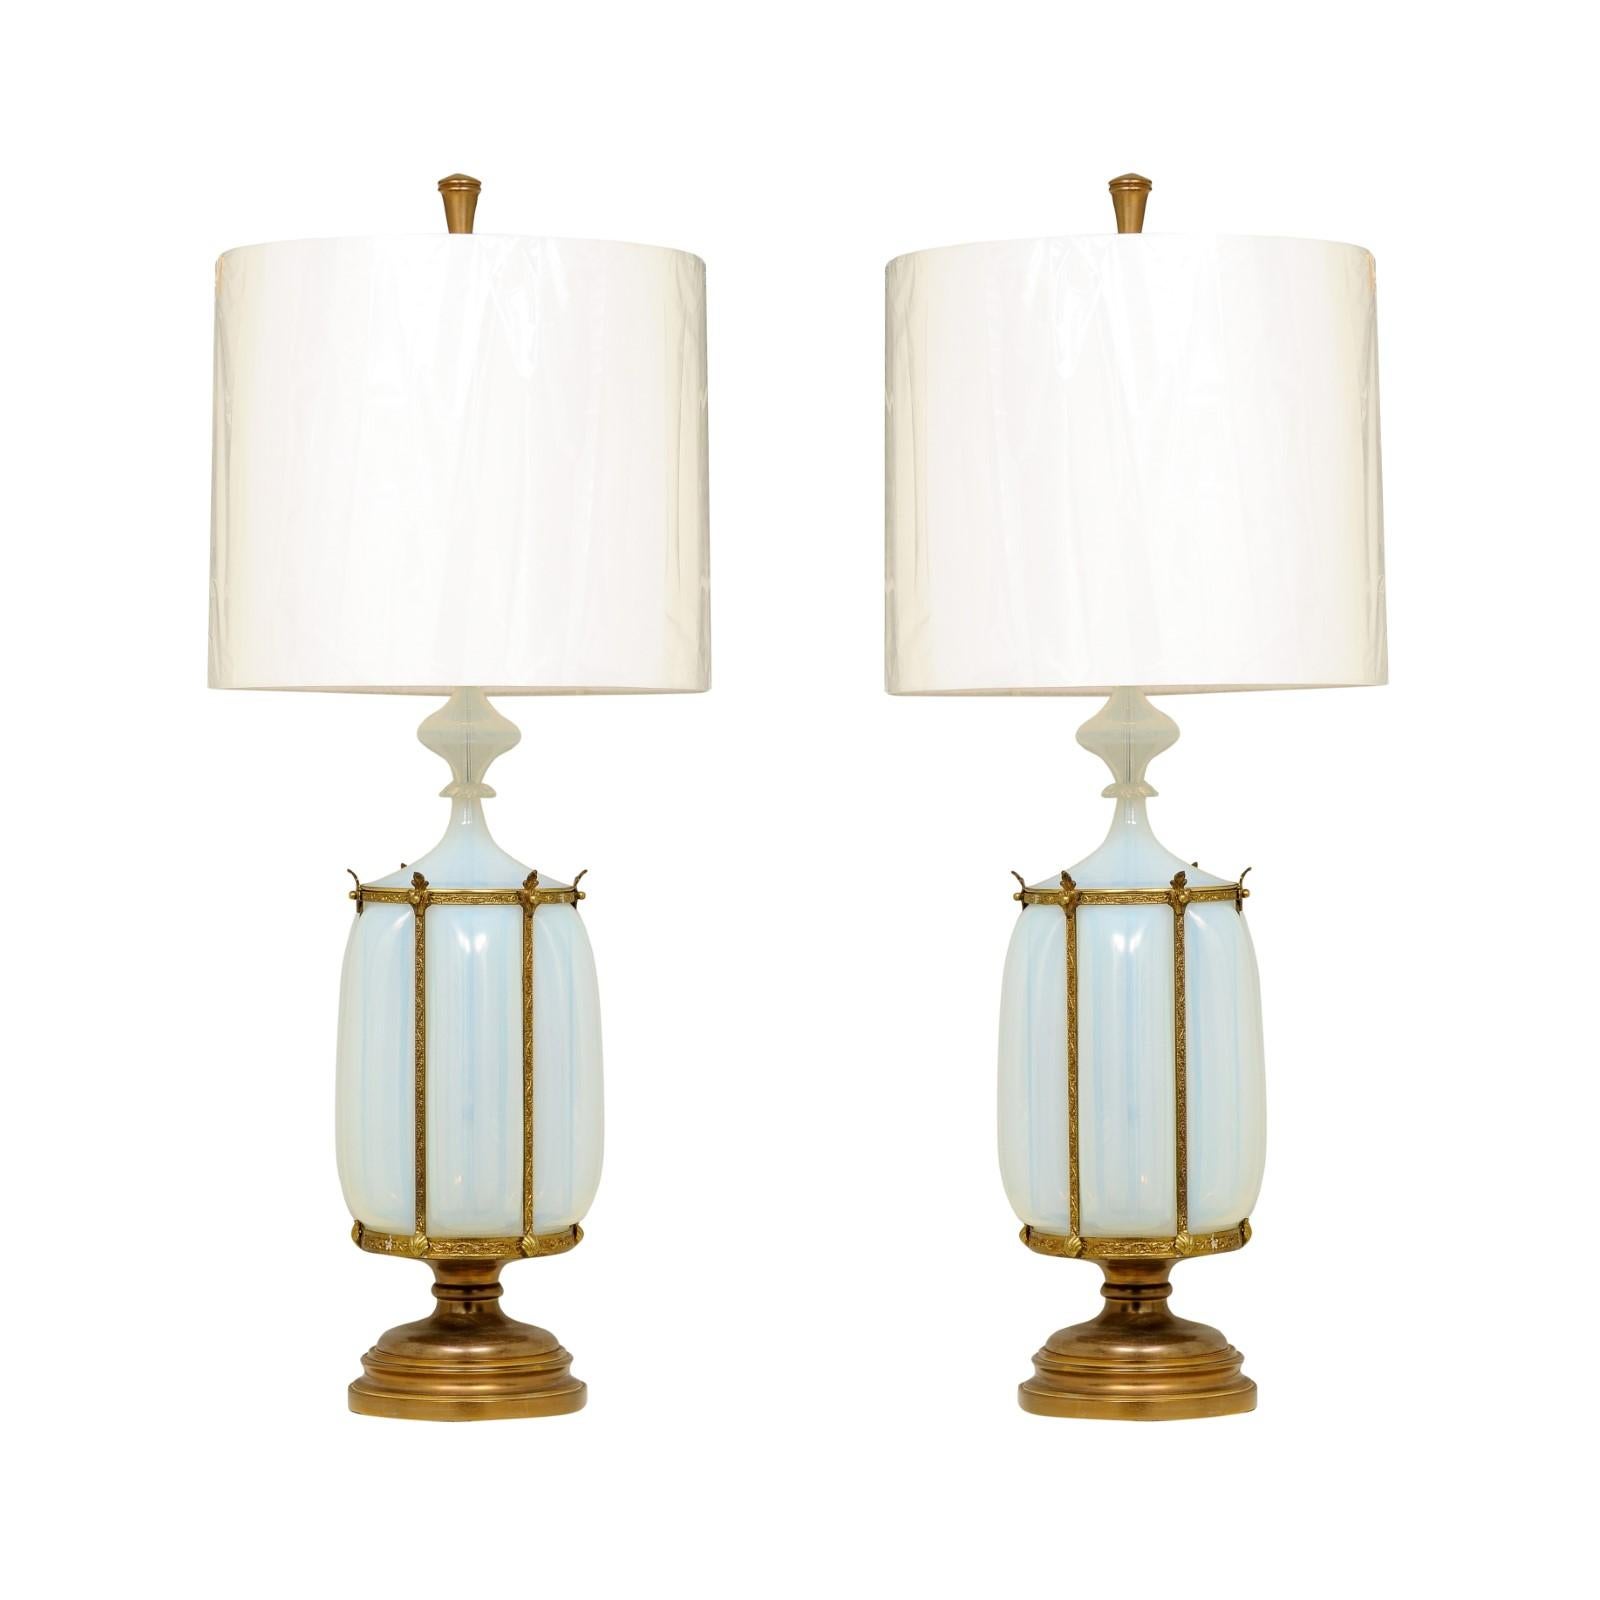 These magnificent lamps are shipped as professionally photographed and described in the narrative. They have been professionally restored using materials of the finest quality and are shipped complete with the new shades, harps and finials shown in